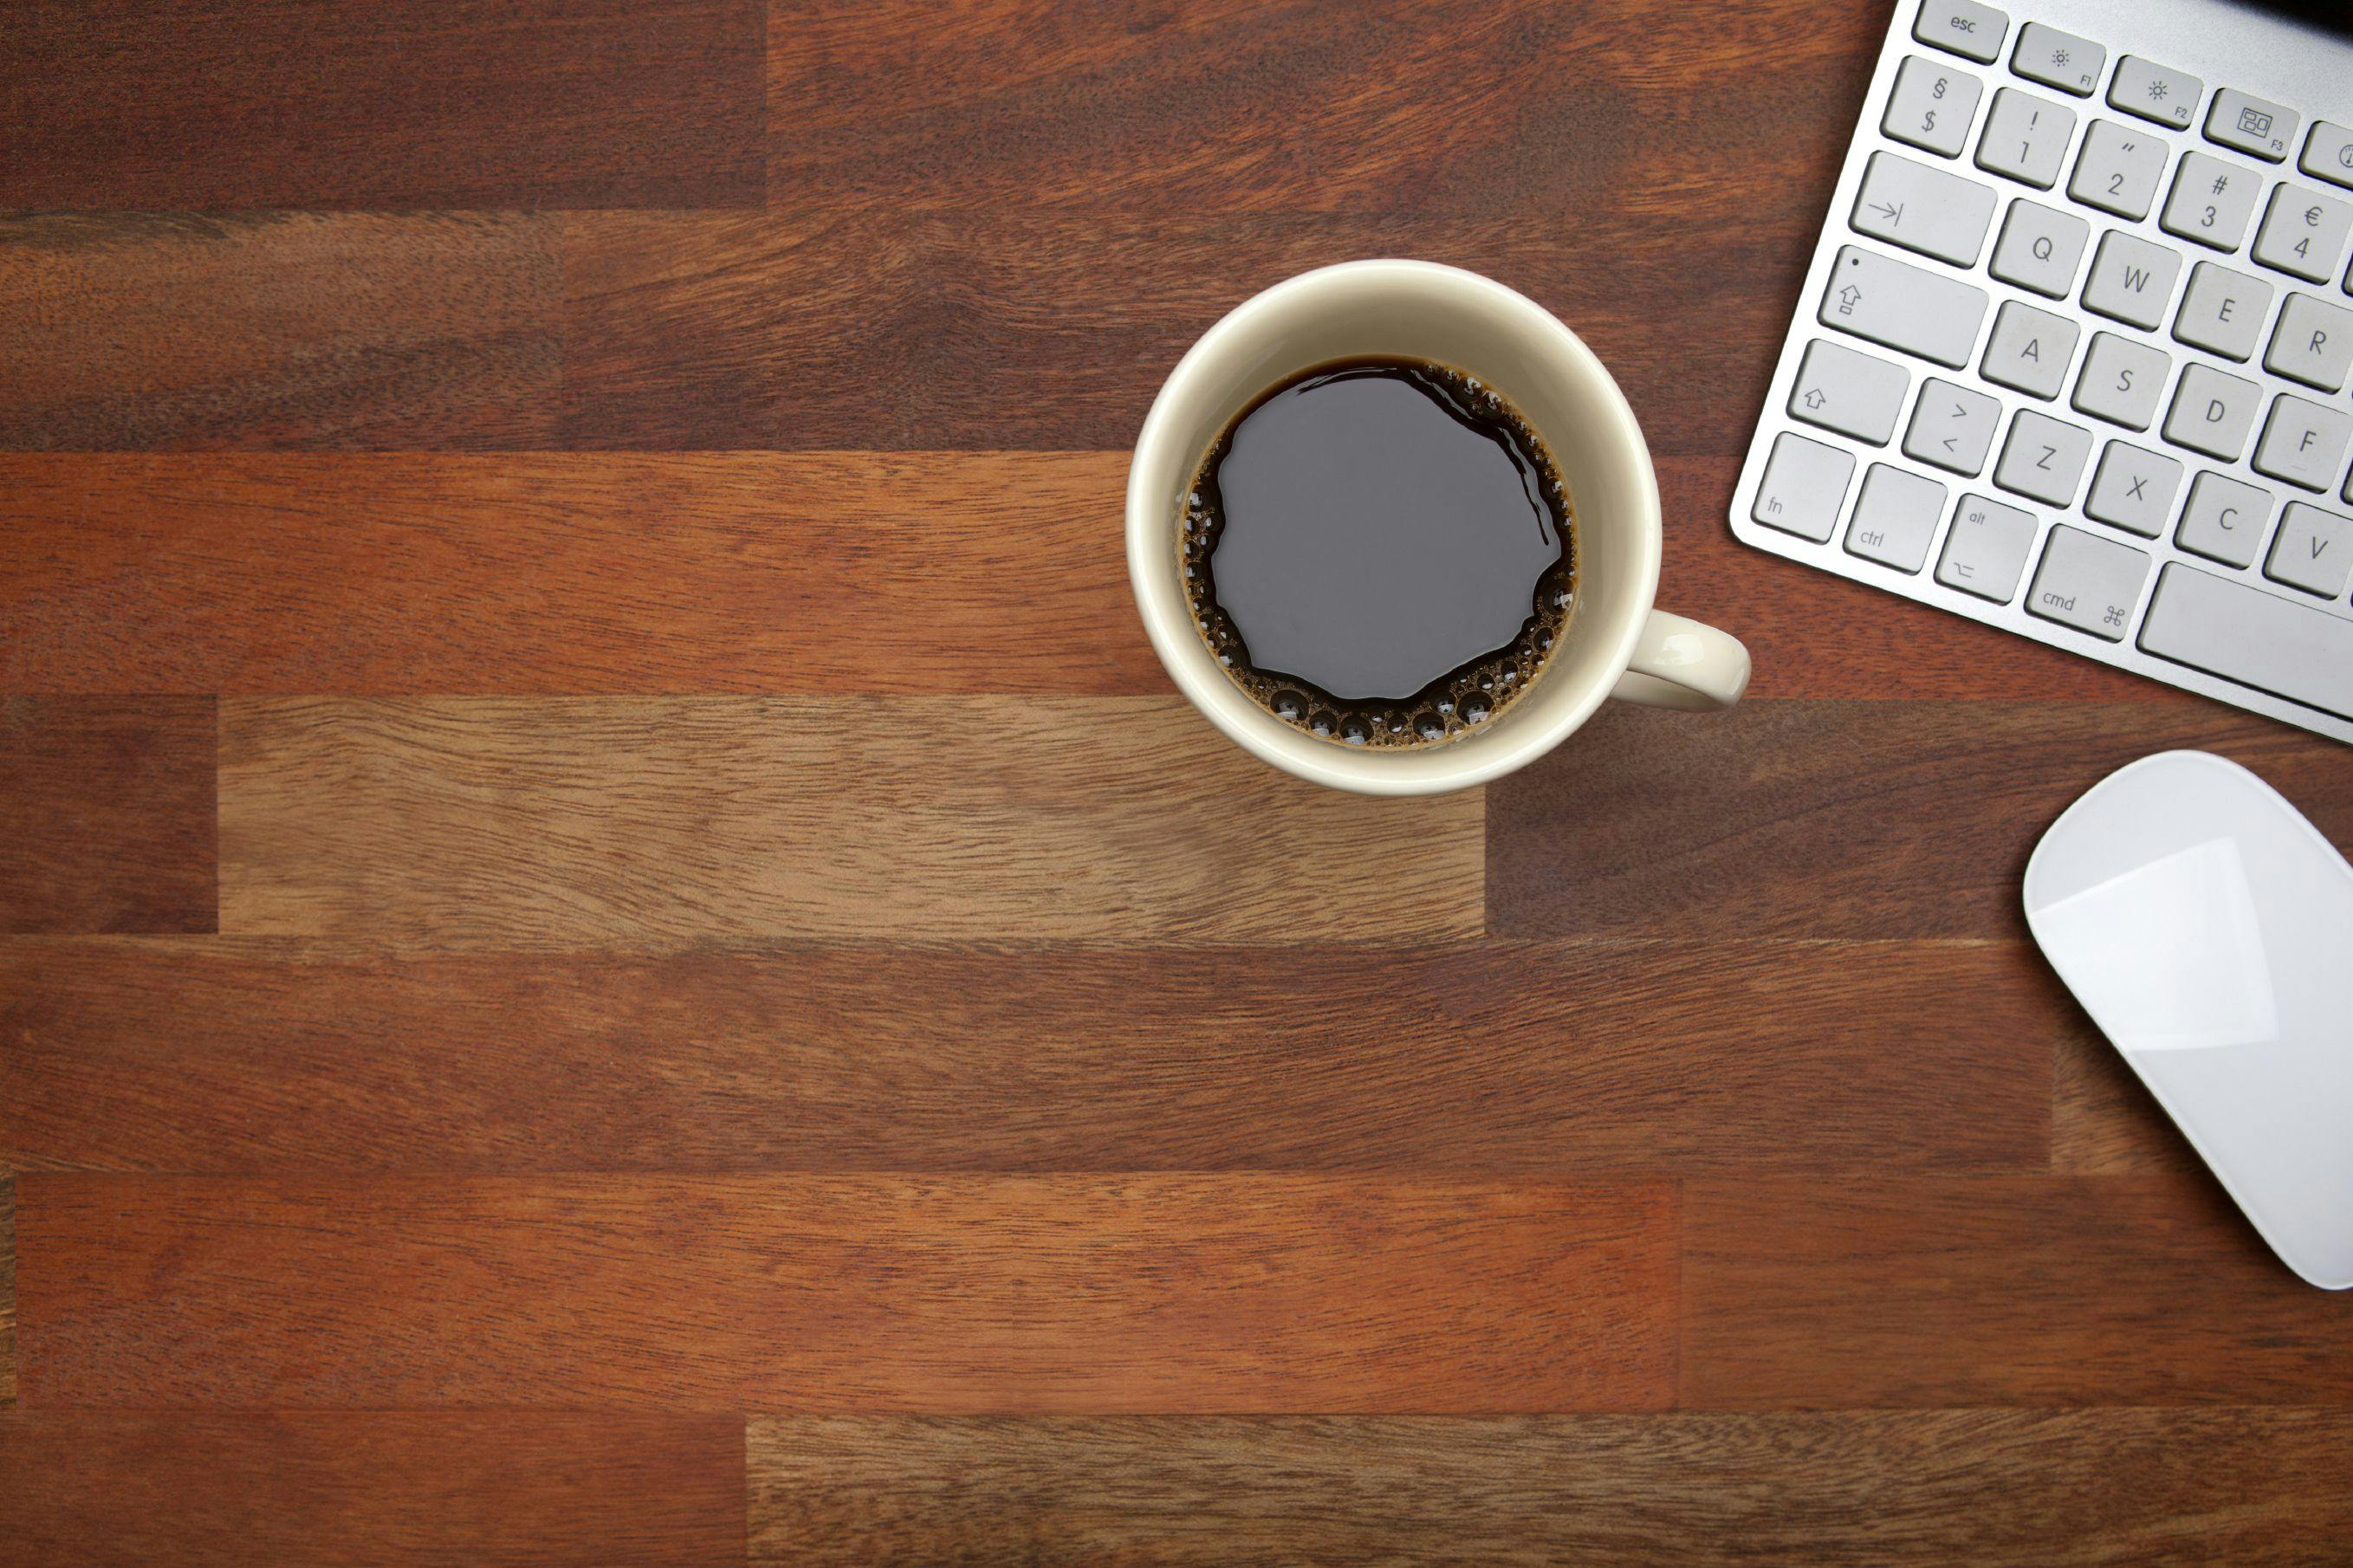 Stock image showing a cup of coffee next to a laptop keyboard.